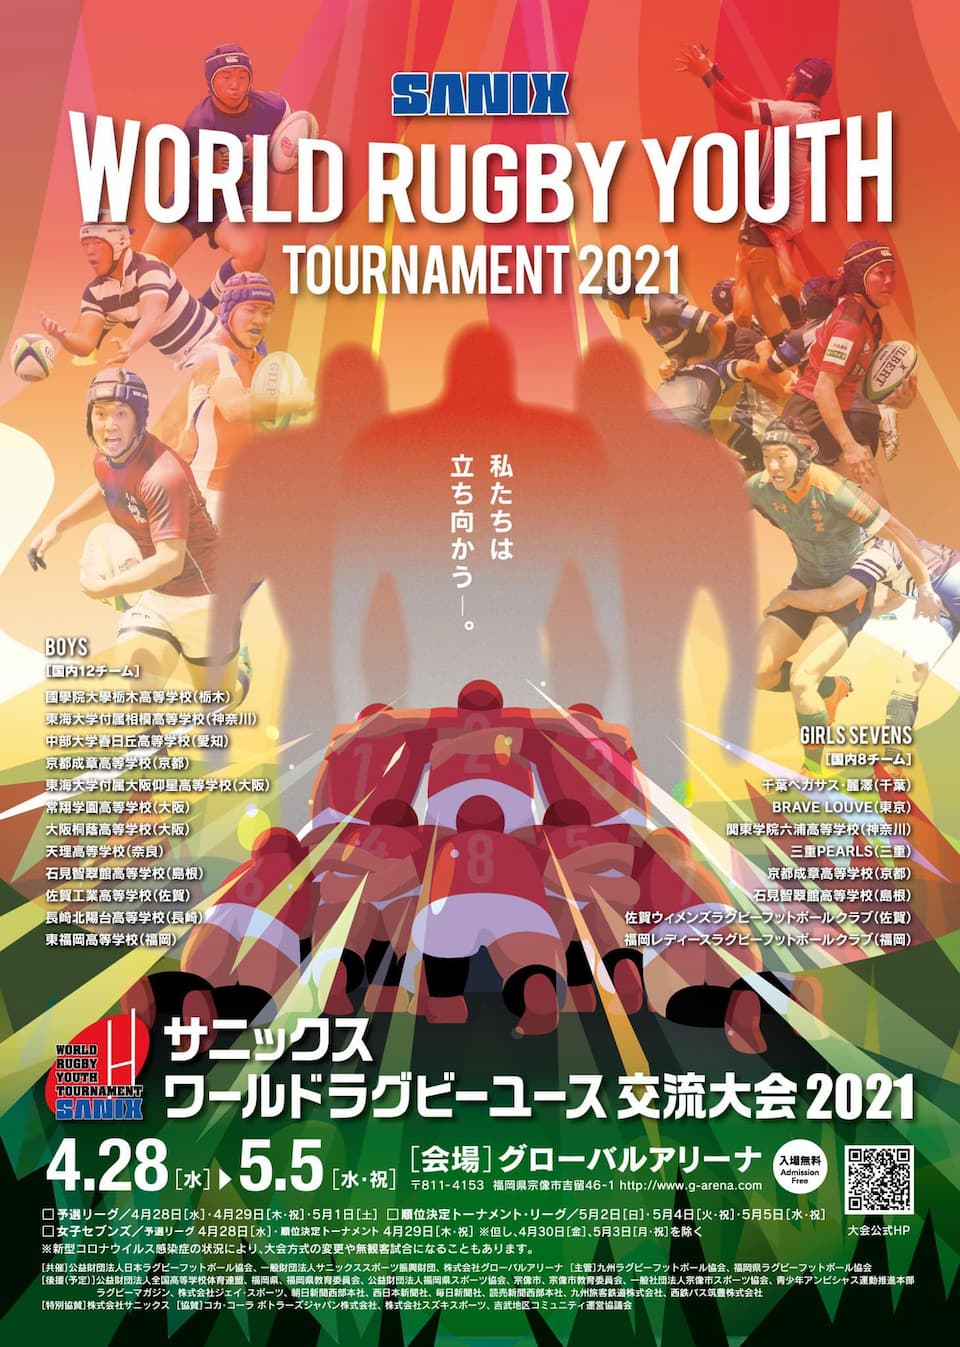 SANIX World Rugby Youth Tournament 2021